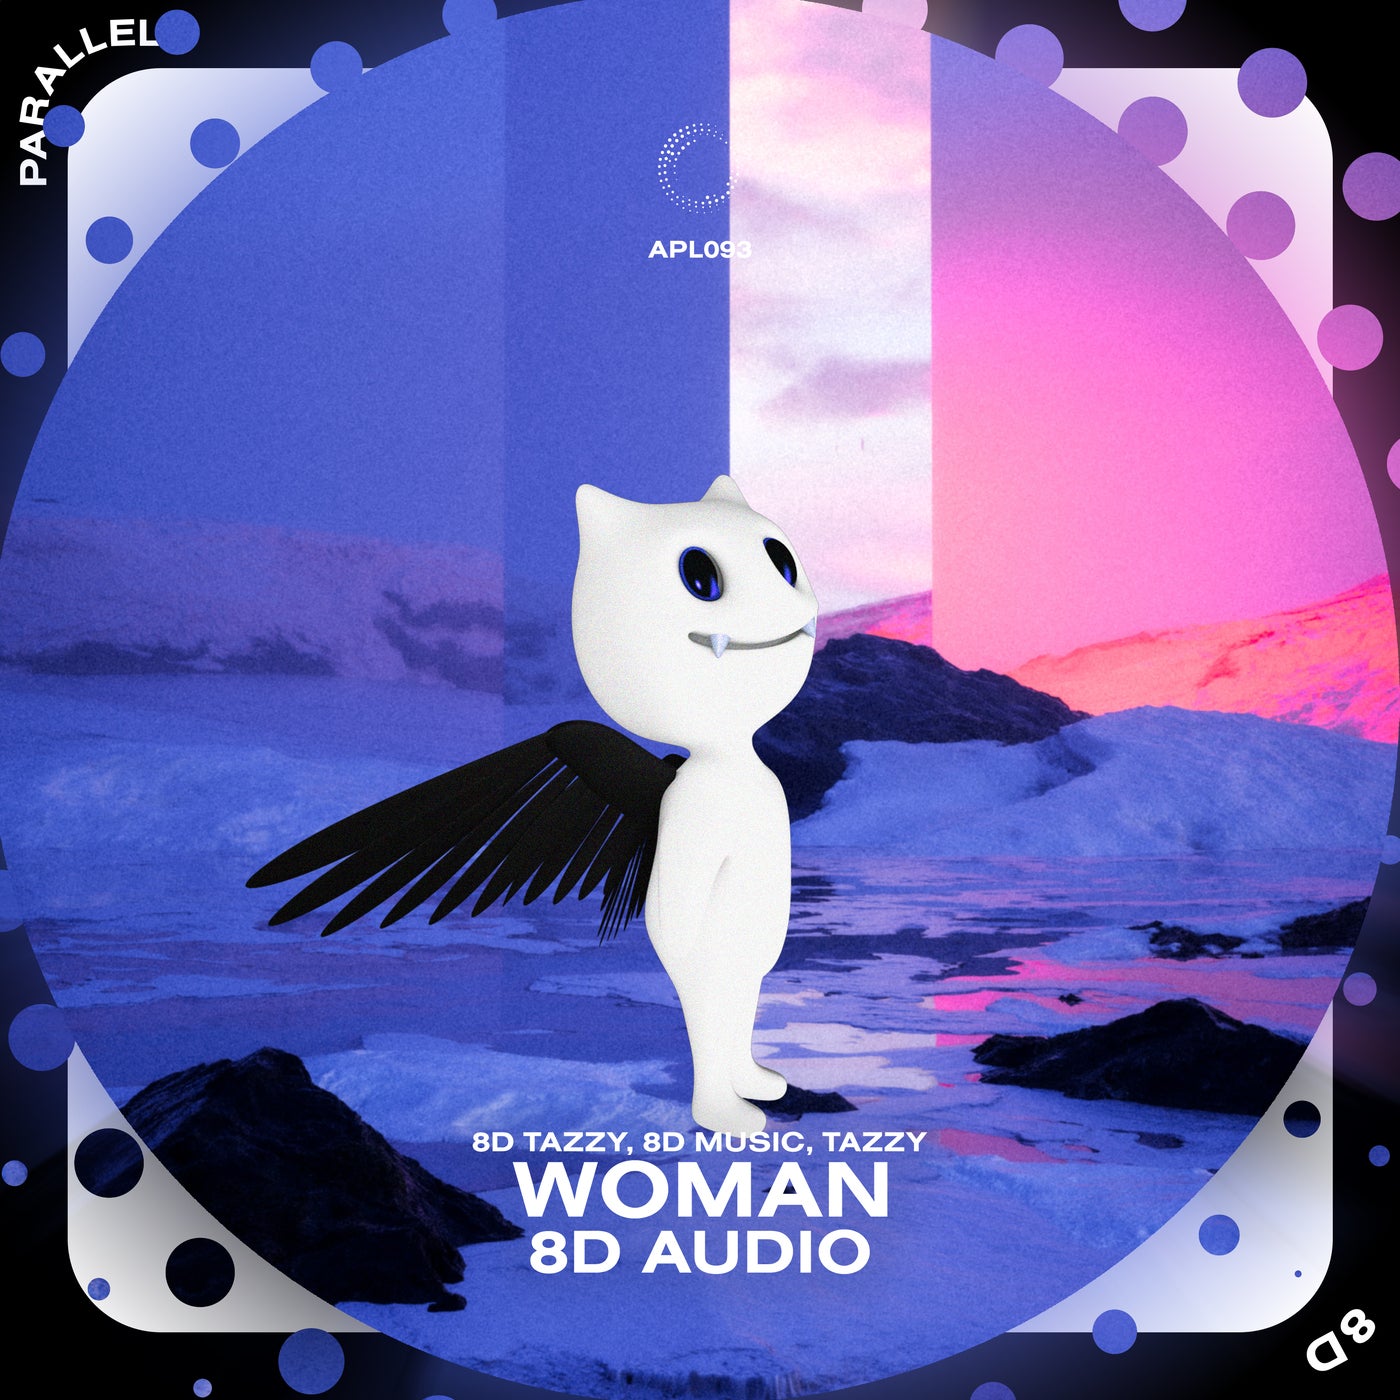 Woman - 8D Audio (Original Mix) by Tazzy, 8d Music, 8D Tazzy on Beatport